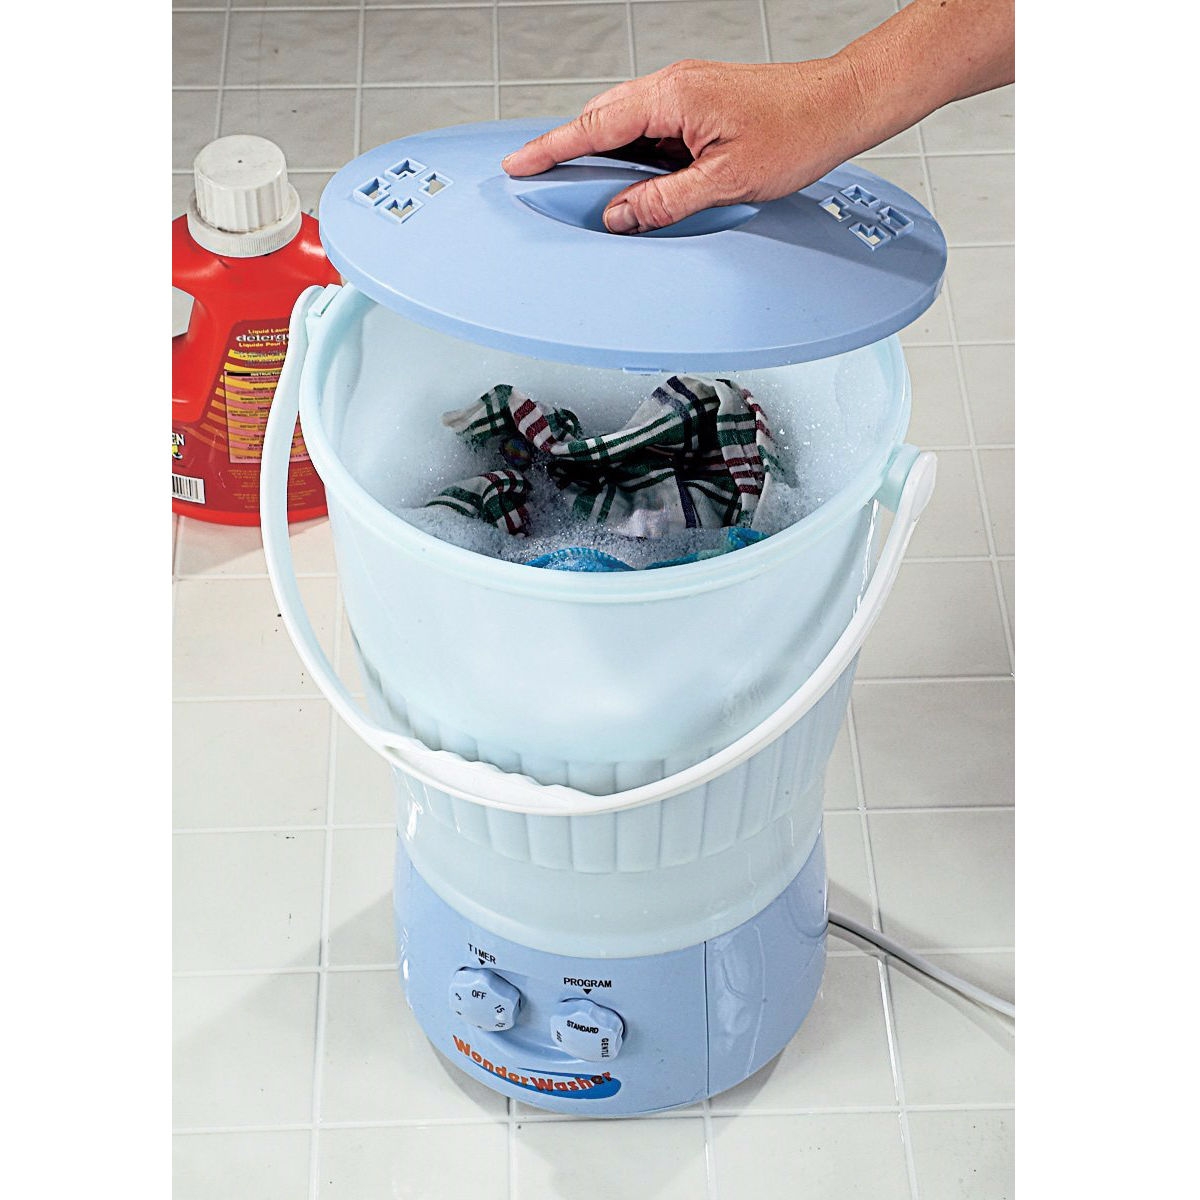 Should Know About the Portable Washing Machine